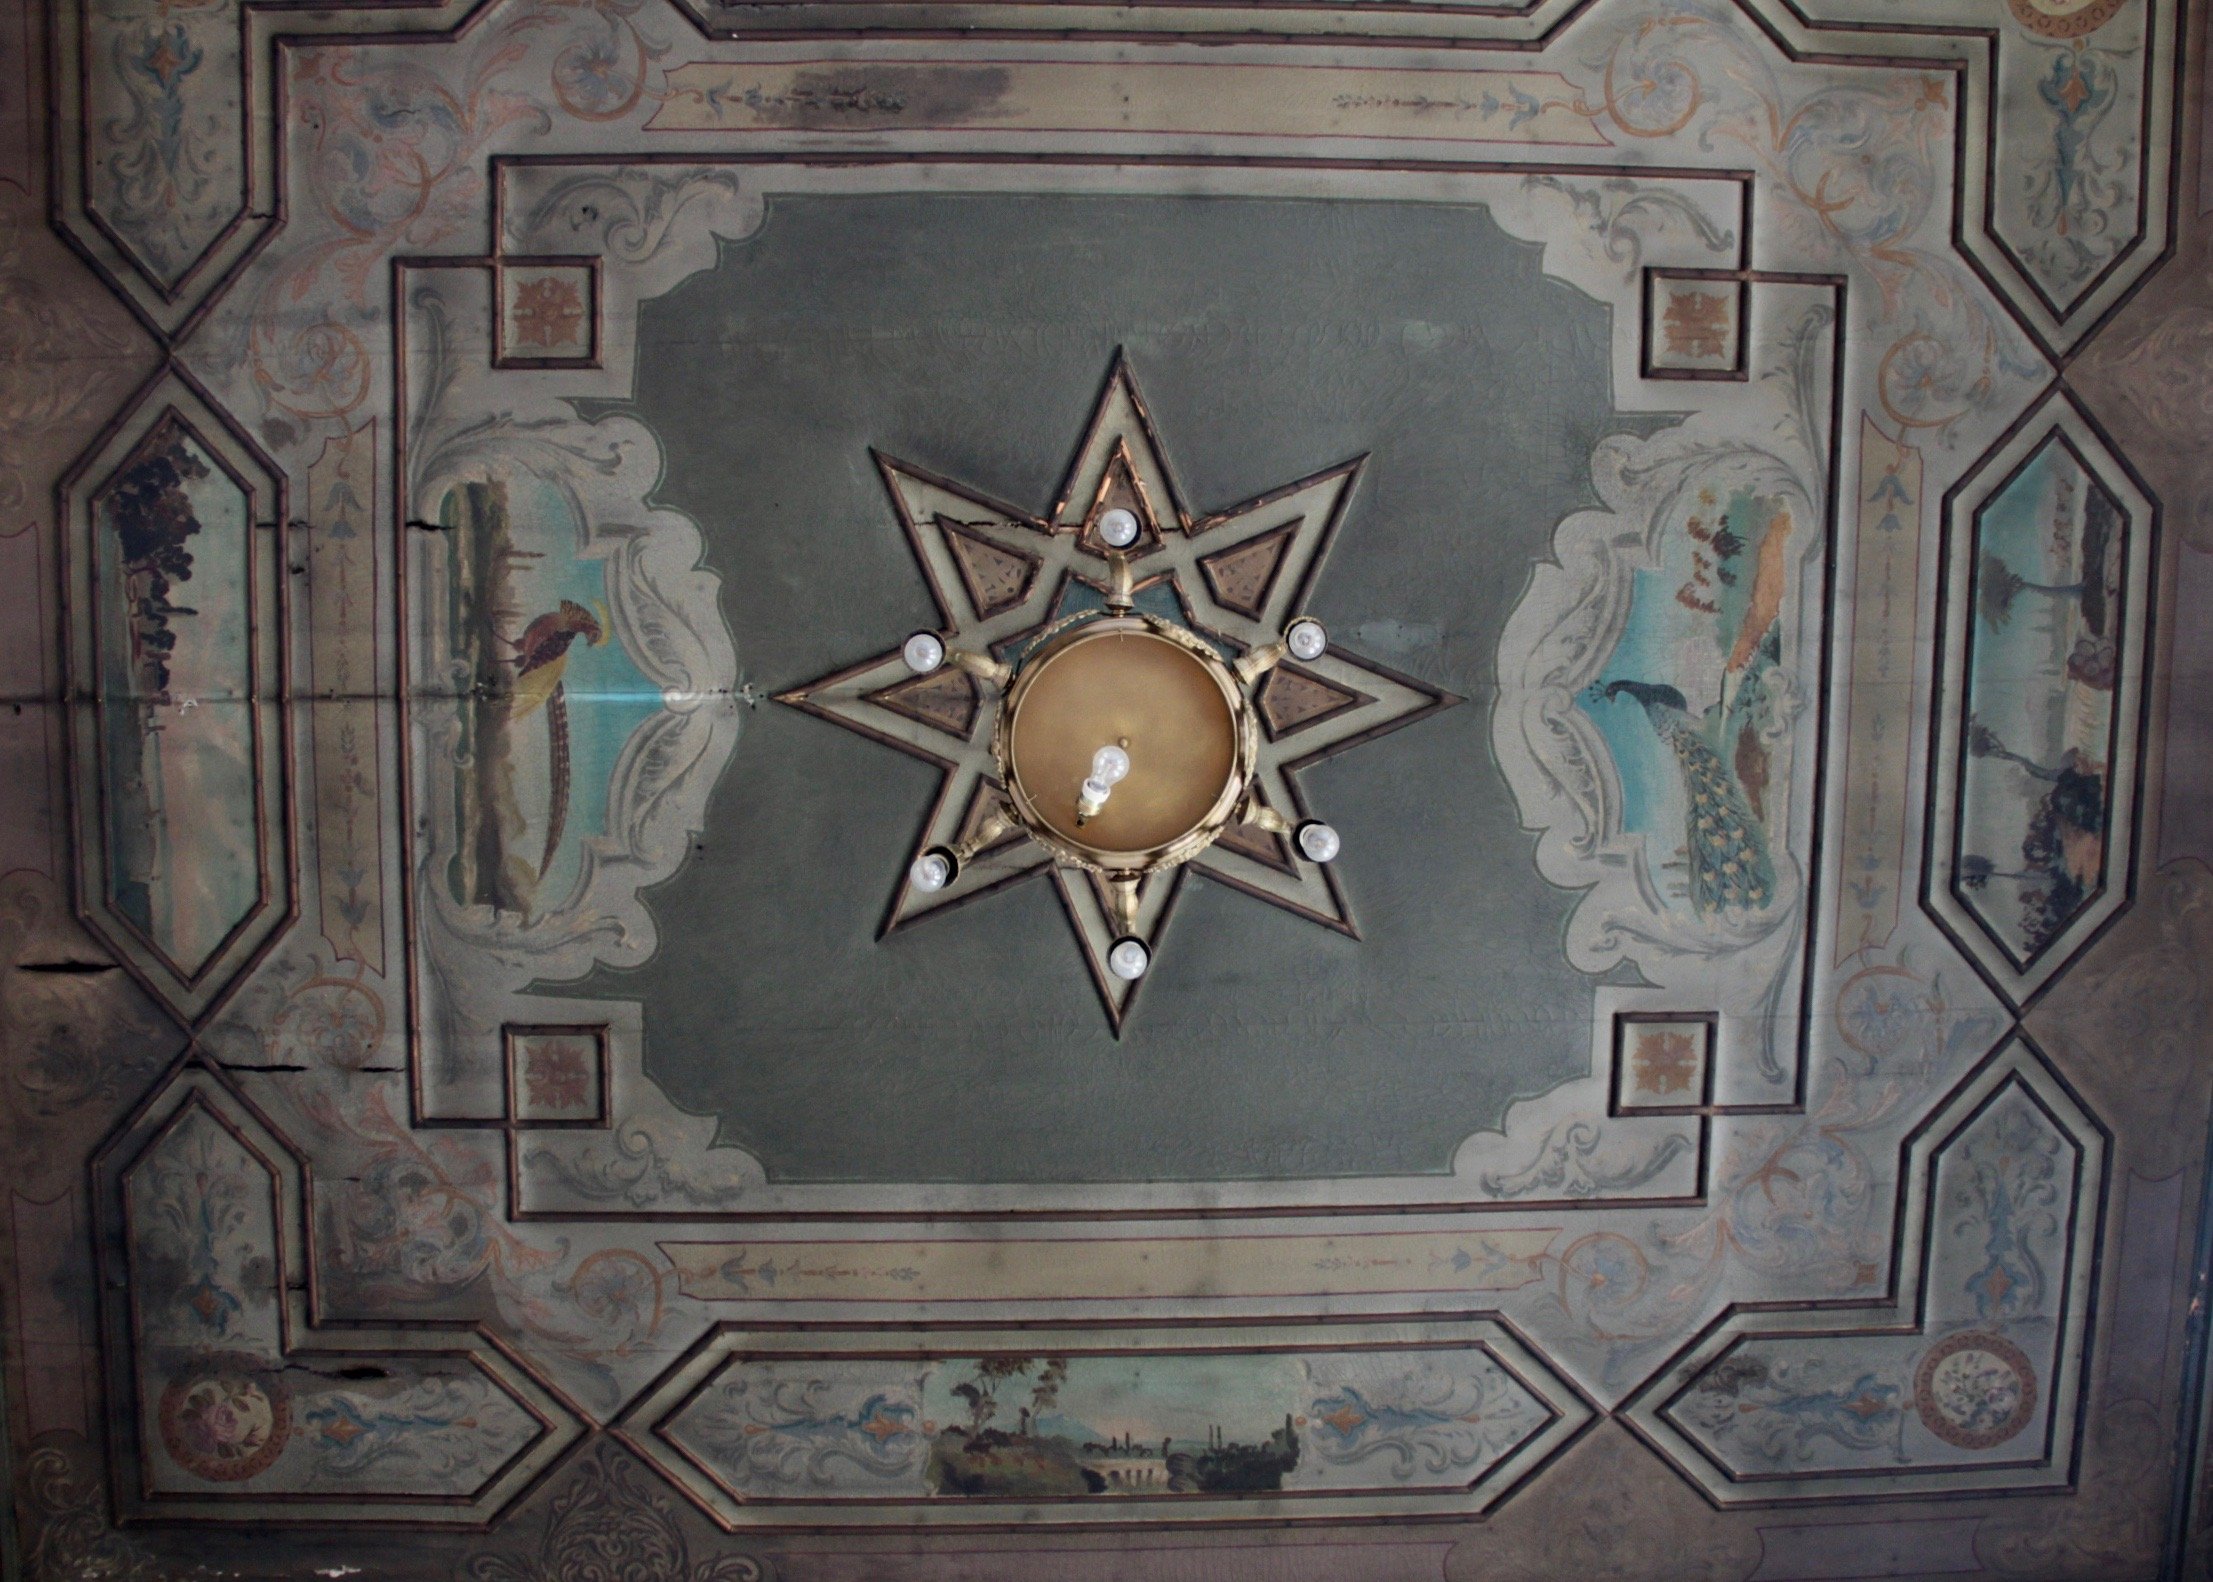 Ceiling decorations at the mansion are fascinating. (AA Photo)